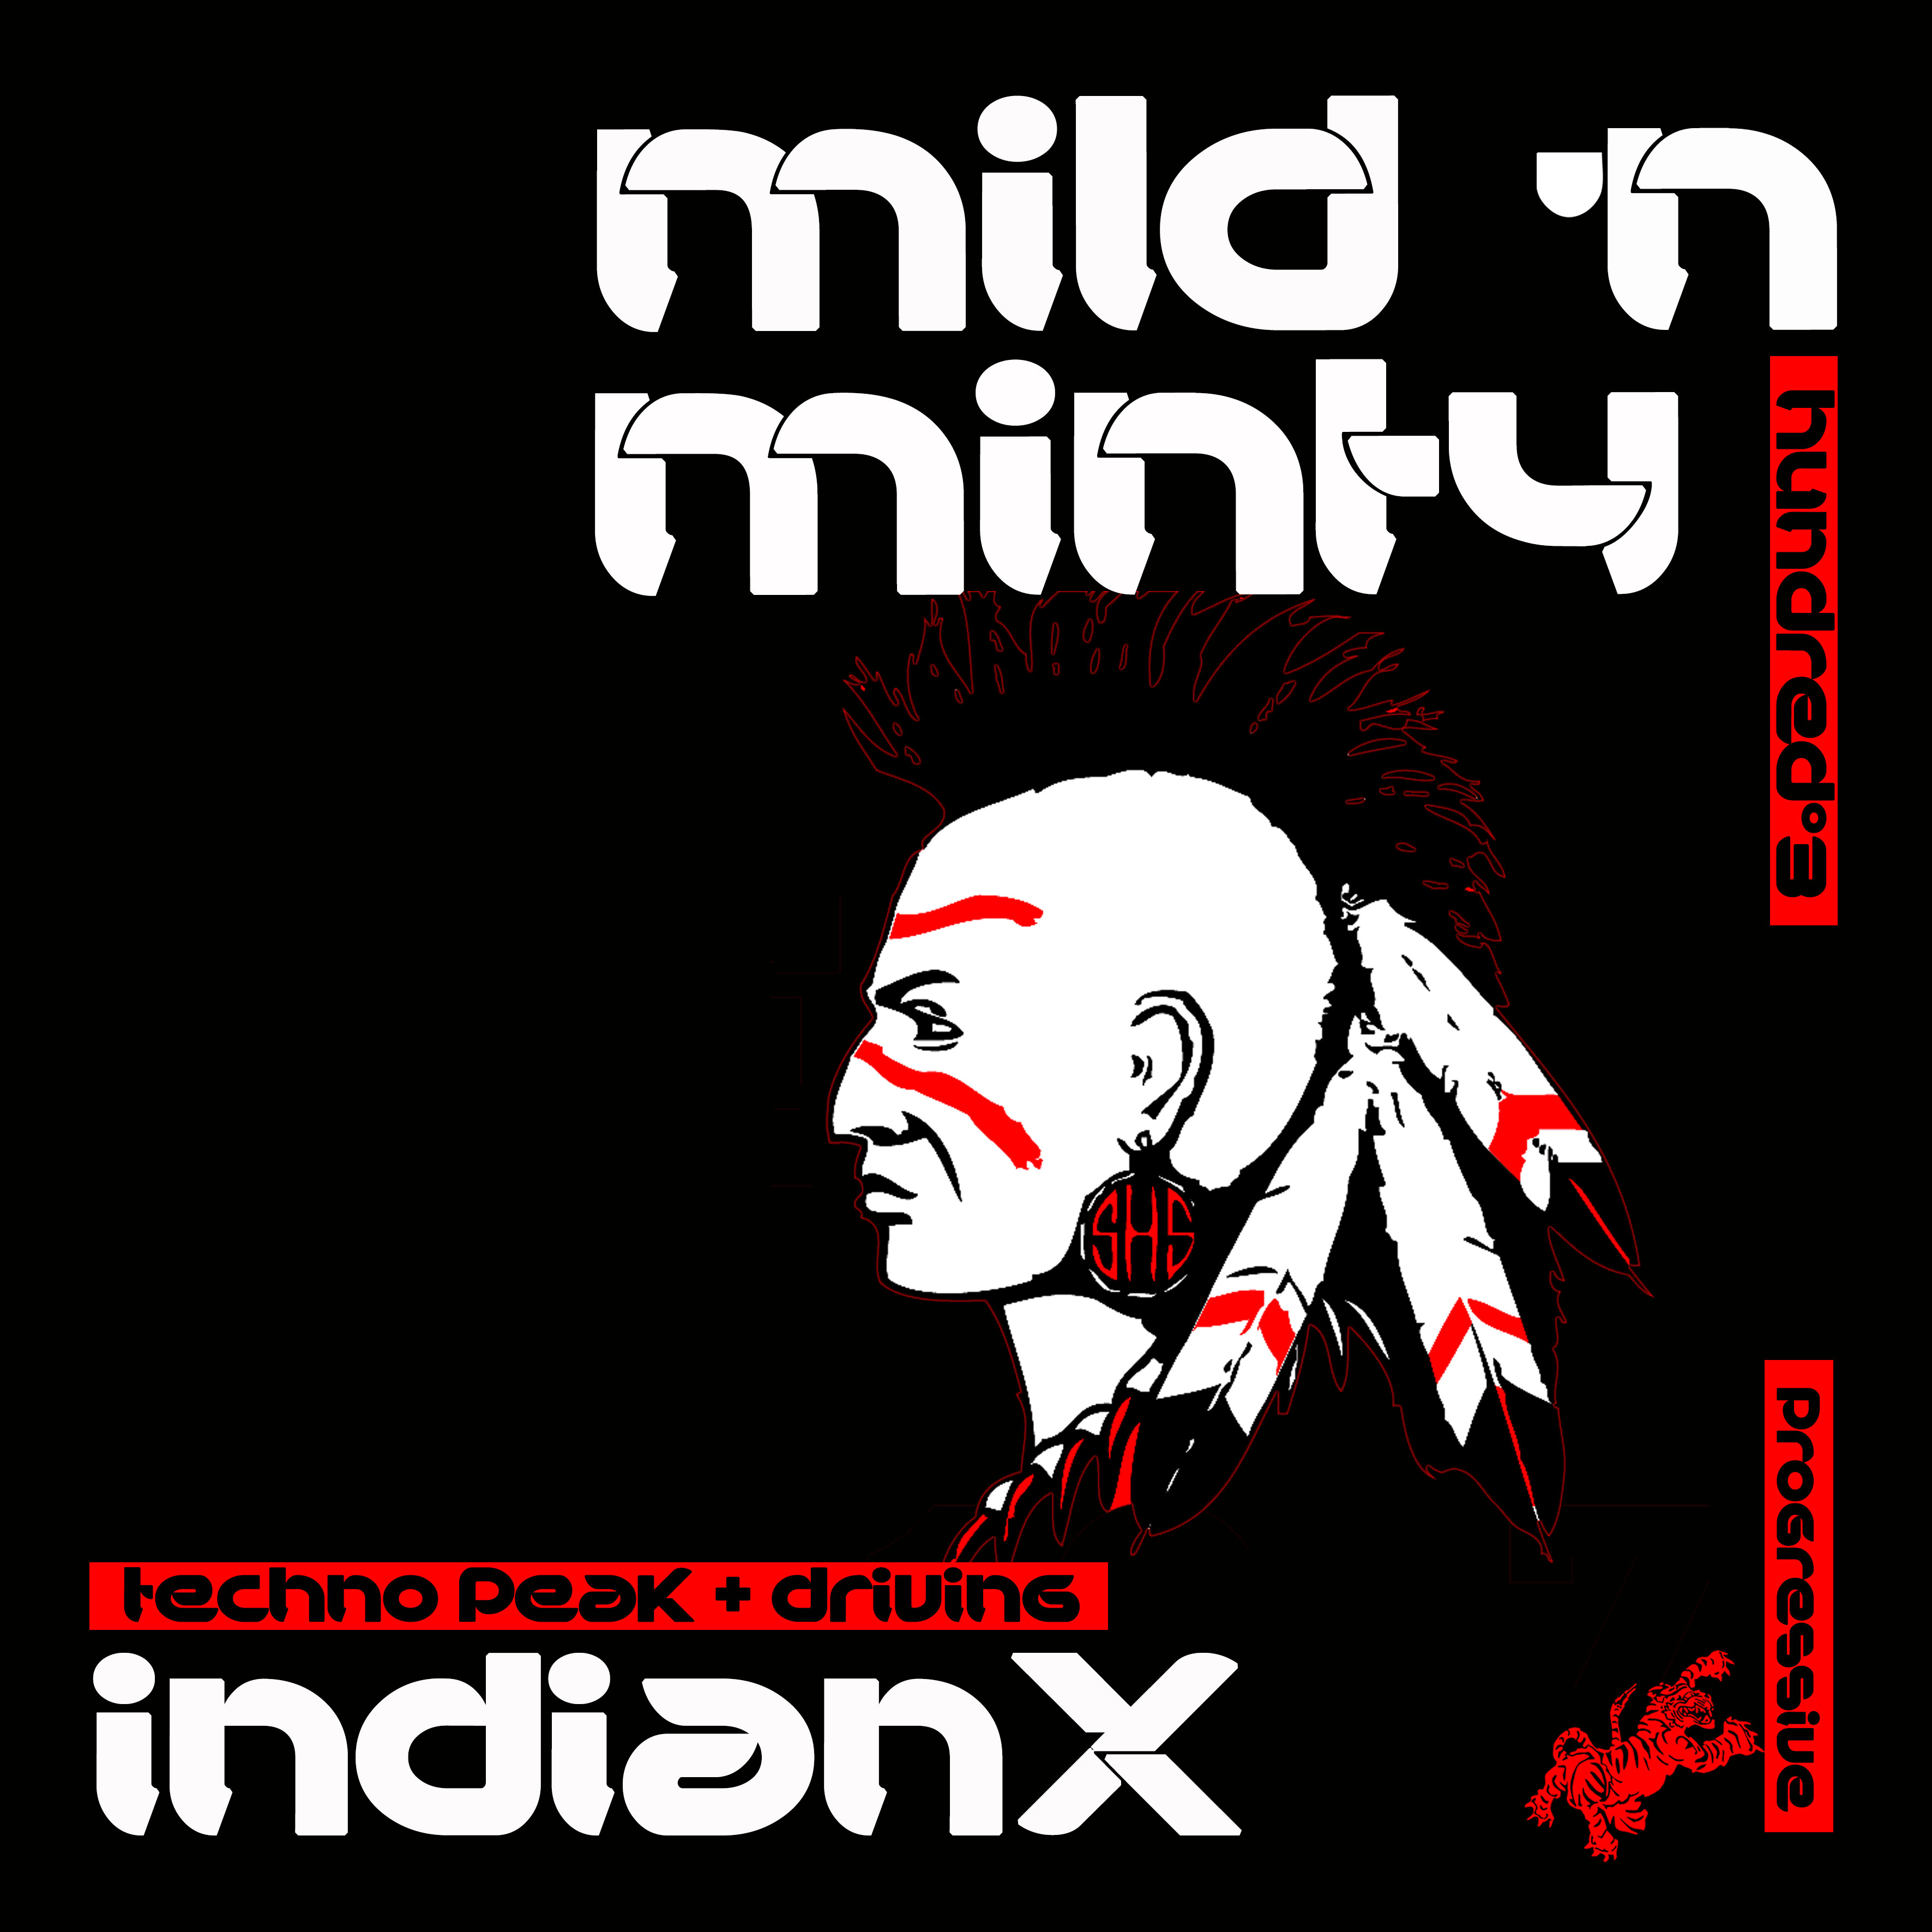 Next Episode indianX - Mild 'N Minty - 103 (premieres on May 30th)